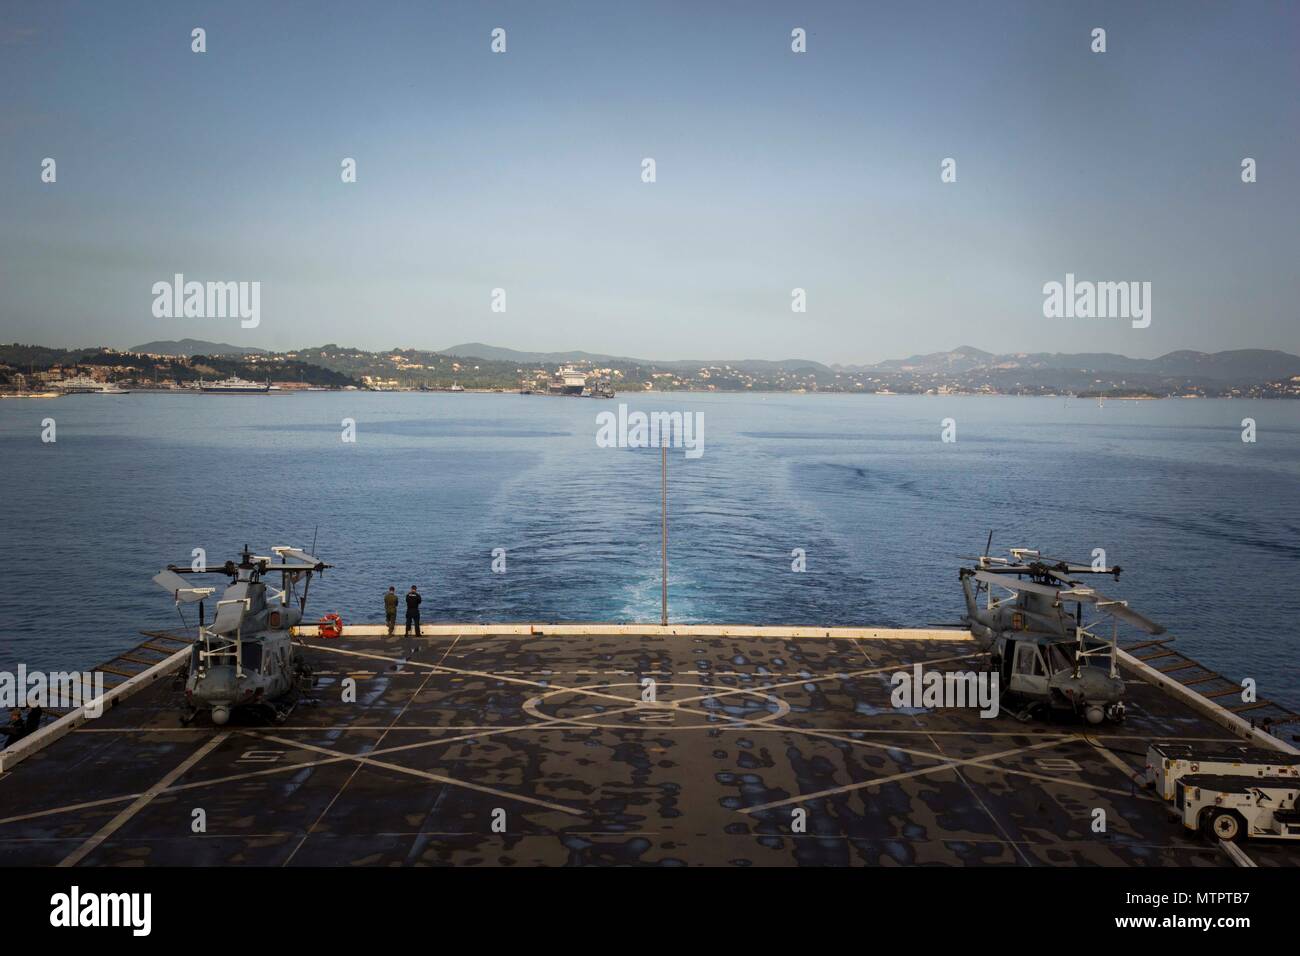 CORFU, GREECE (May 17, 2018) The San Antonio-class amphibious transport dock USS New York (LPD 21) departs Corfu, Greece, May 21, 2018, following scheduled port visit. New York, since departing its home port of Mayport, Florida, has been providing a forward naval presence that supports maritime security operations, crisis response and theater security cooperation in European, Africa, and Middle Eastern theaters. (U.S. Marine Corps photo by Cpl. Juan A. Soto-Delgado/Released) Stock Photo